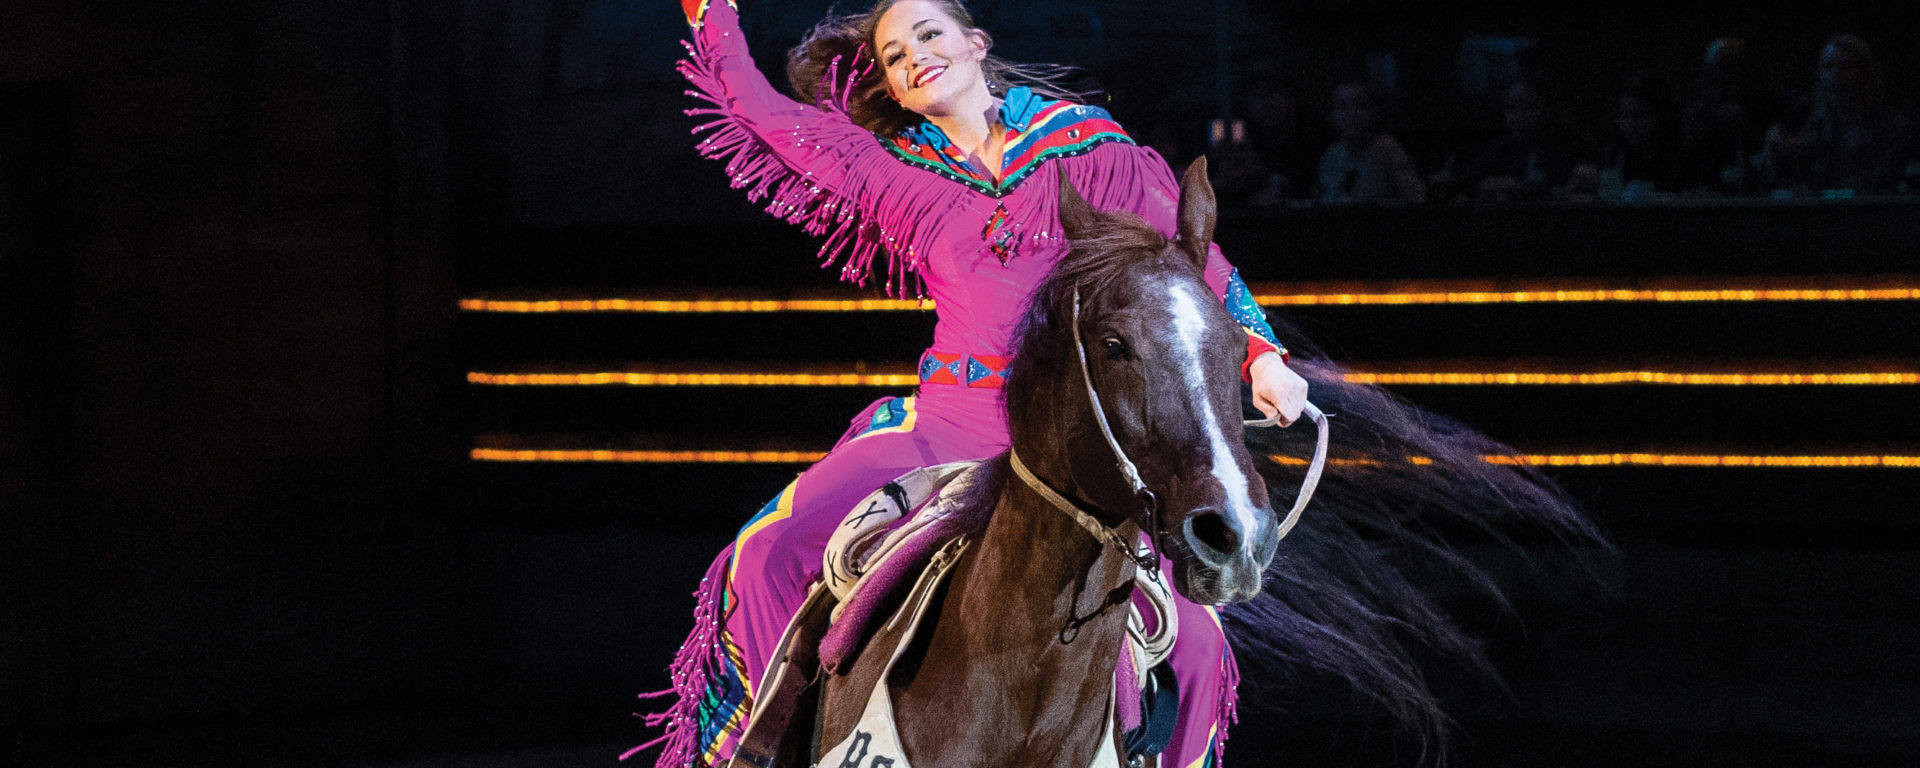 Emma Jo Eversole greets the crowd on horseback at Dolly Parton's Stampede